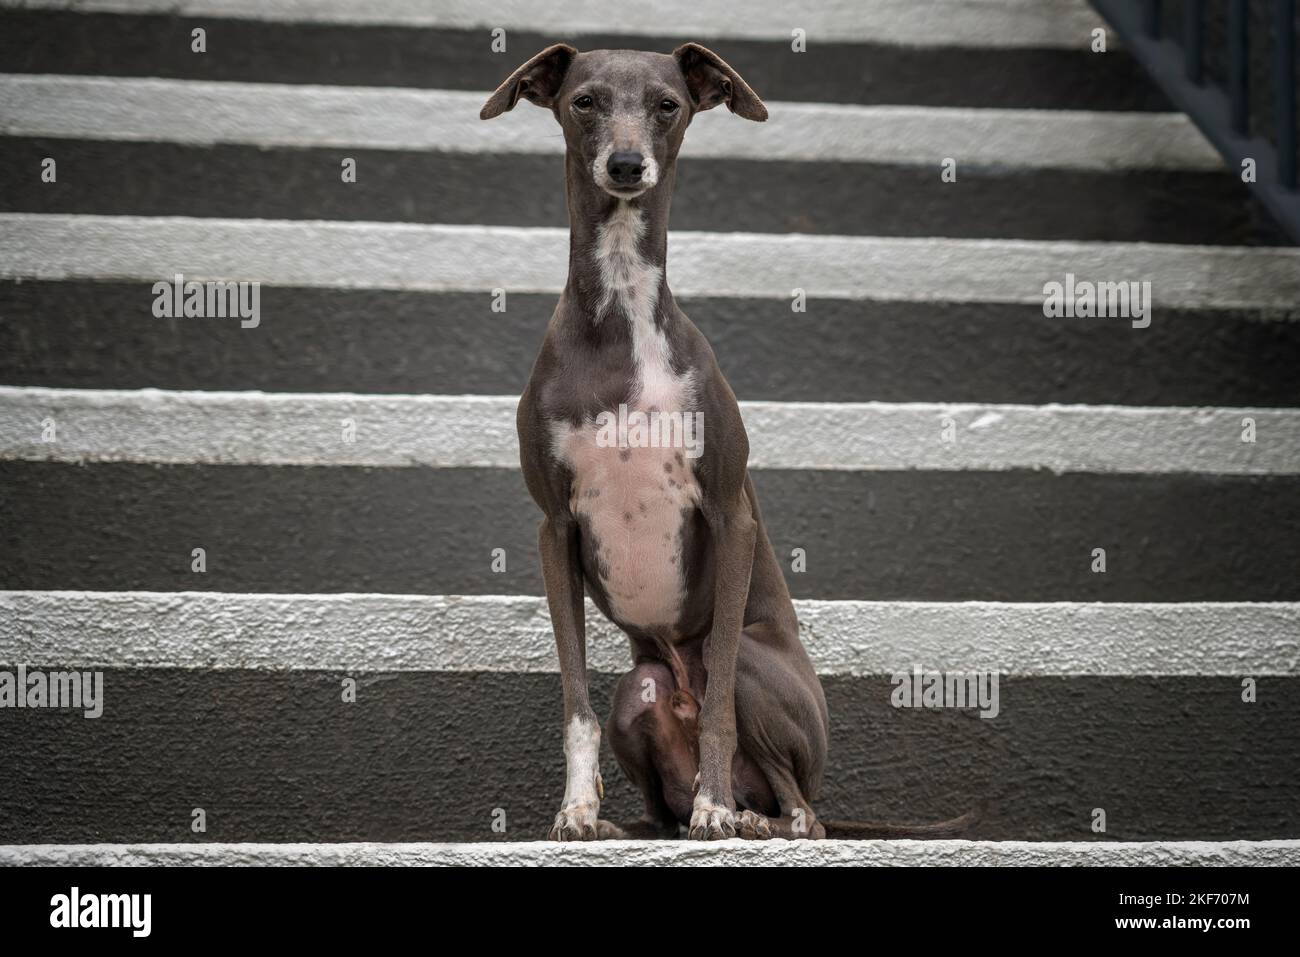 Italian Greyhound - grey brown in colour, standing on the stairs and looking directly at the camera Stock Photo